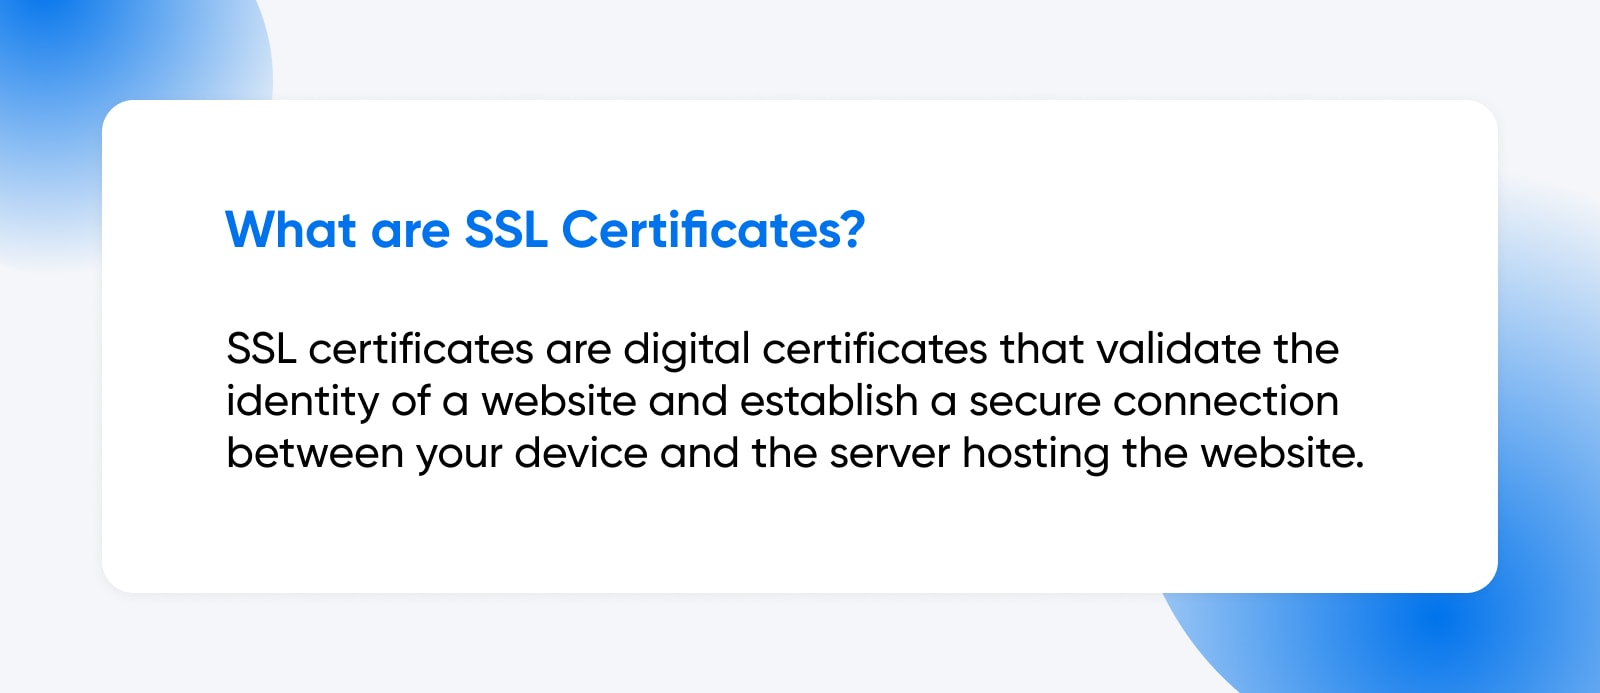 Definition of SSL Certificates. SSL Certificates are digital certificates that validate the identity of a website and establish a secure connection between your device and the server hosting the website.